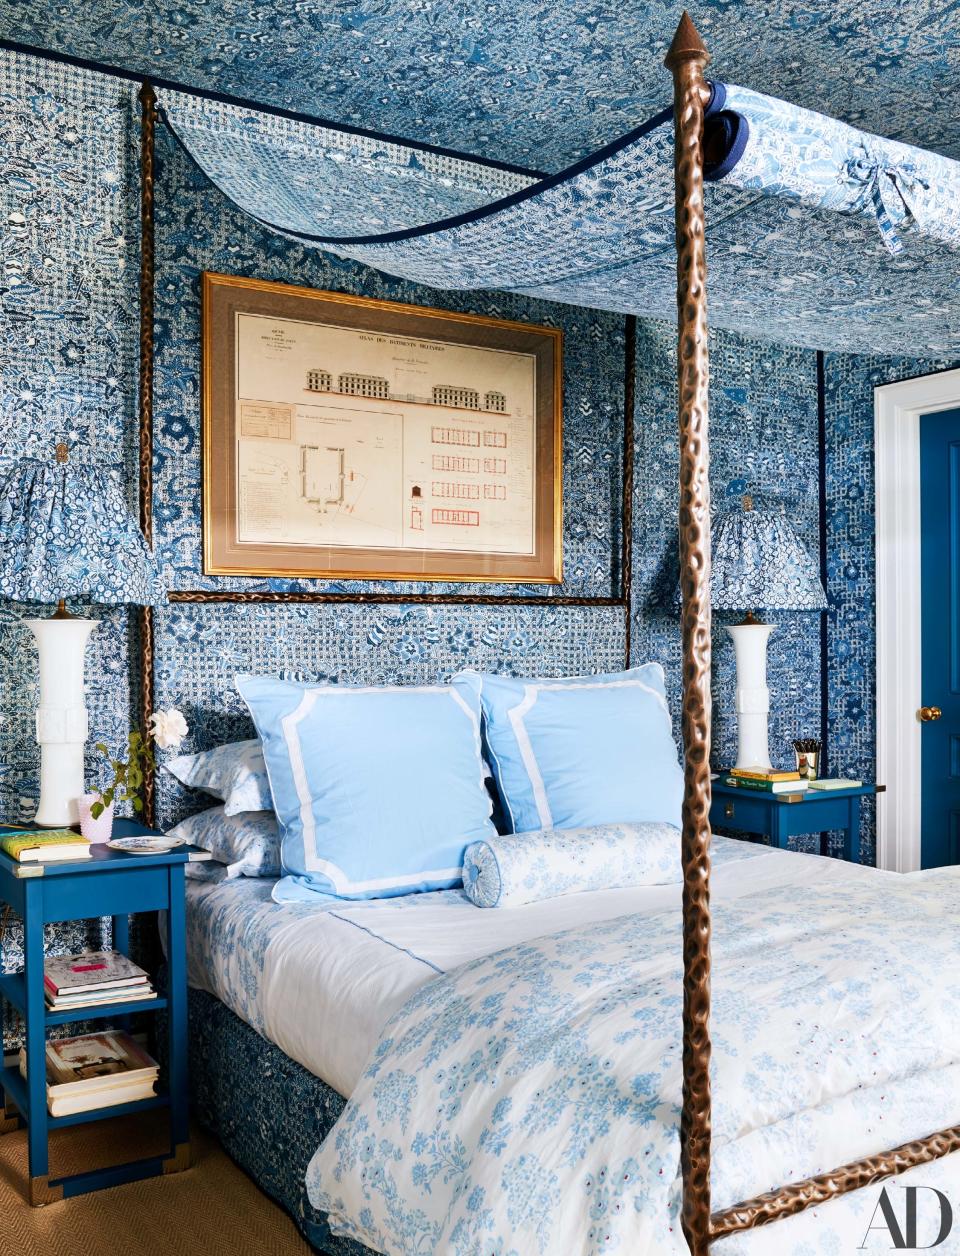 The batik bedroom is covered in a weave by Piece & Co. Custom bed by Morgik Metal; Biscuit Home bedding.